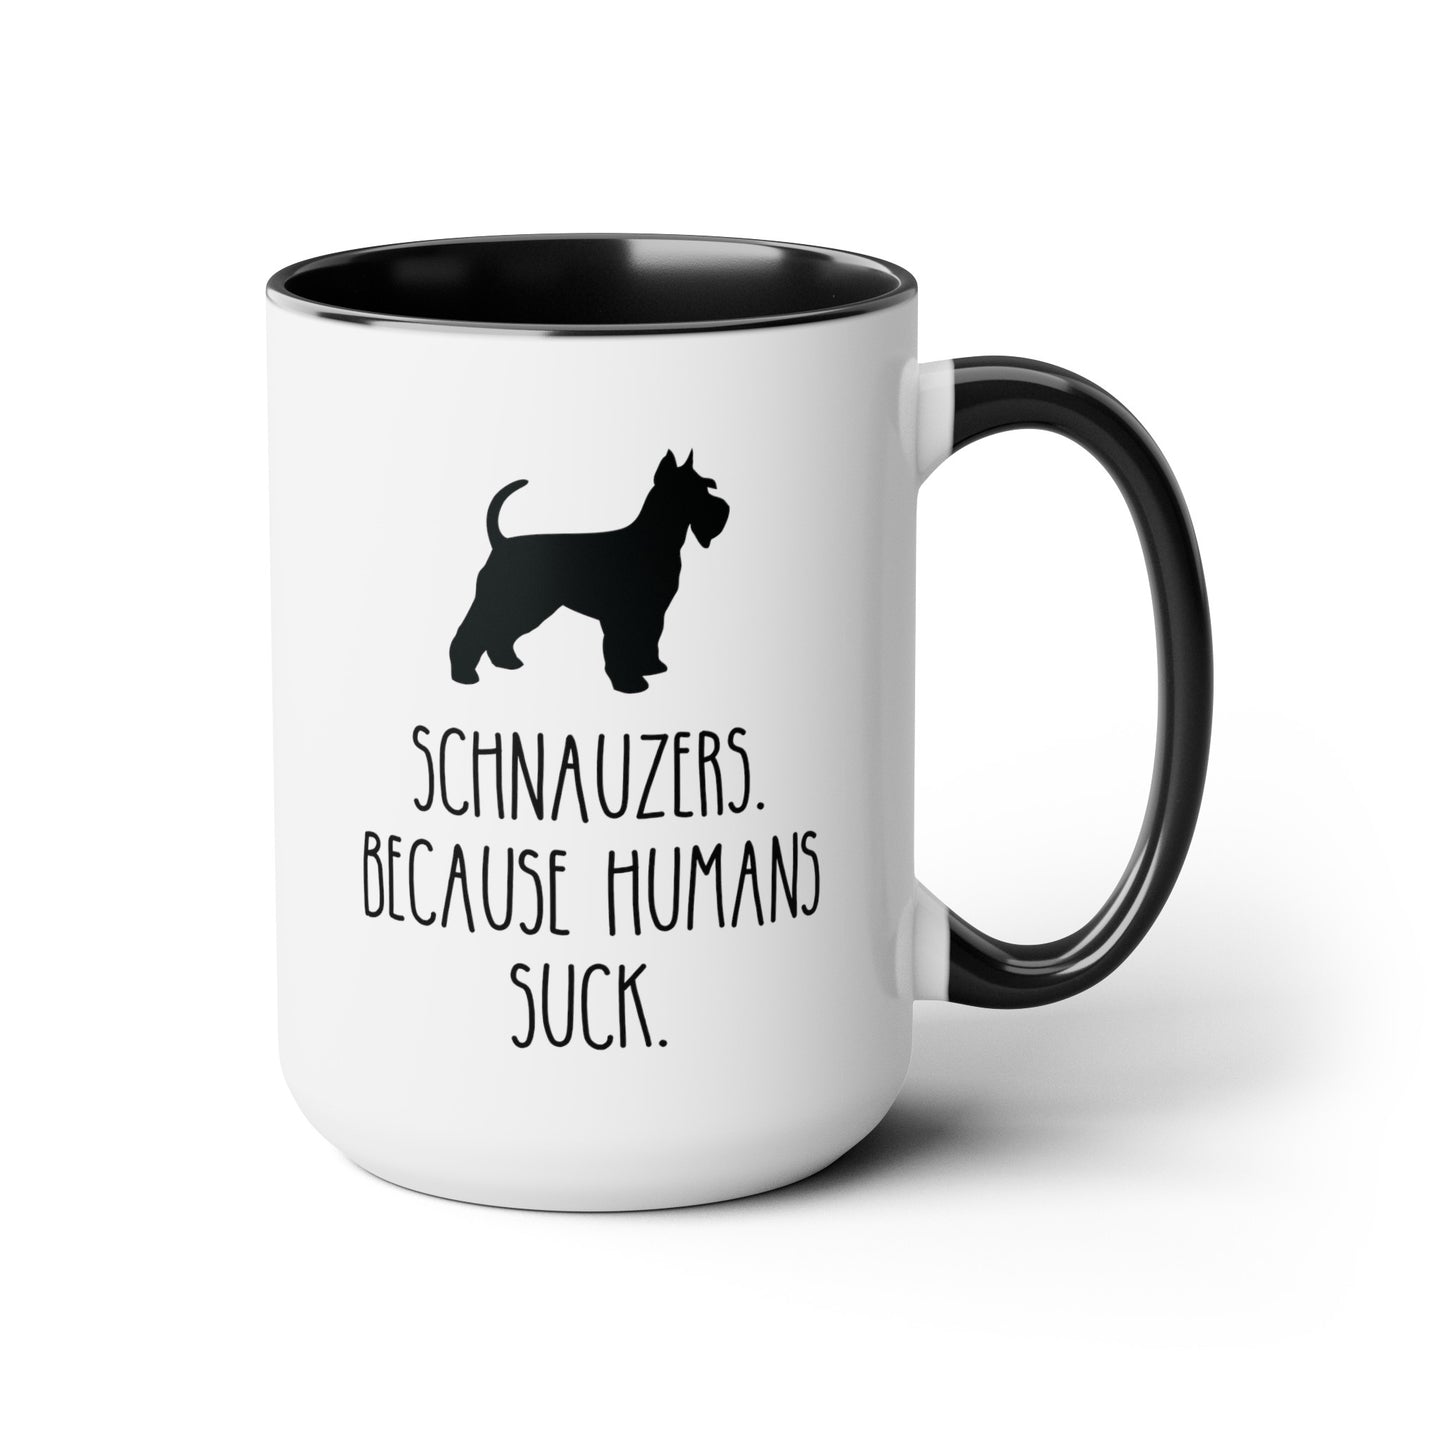 Schnauzers Because Humans Suck 15oz white with black accent funny large coffee mug gift for dog mom lover owner furmom waveywares wavey wares wavywares wavy wares